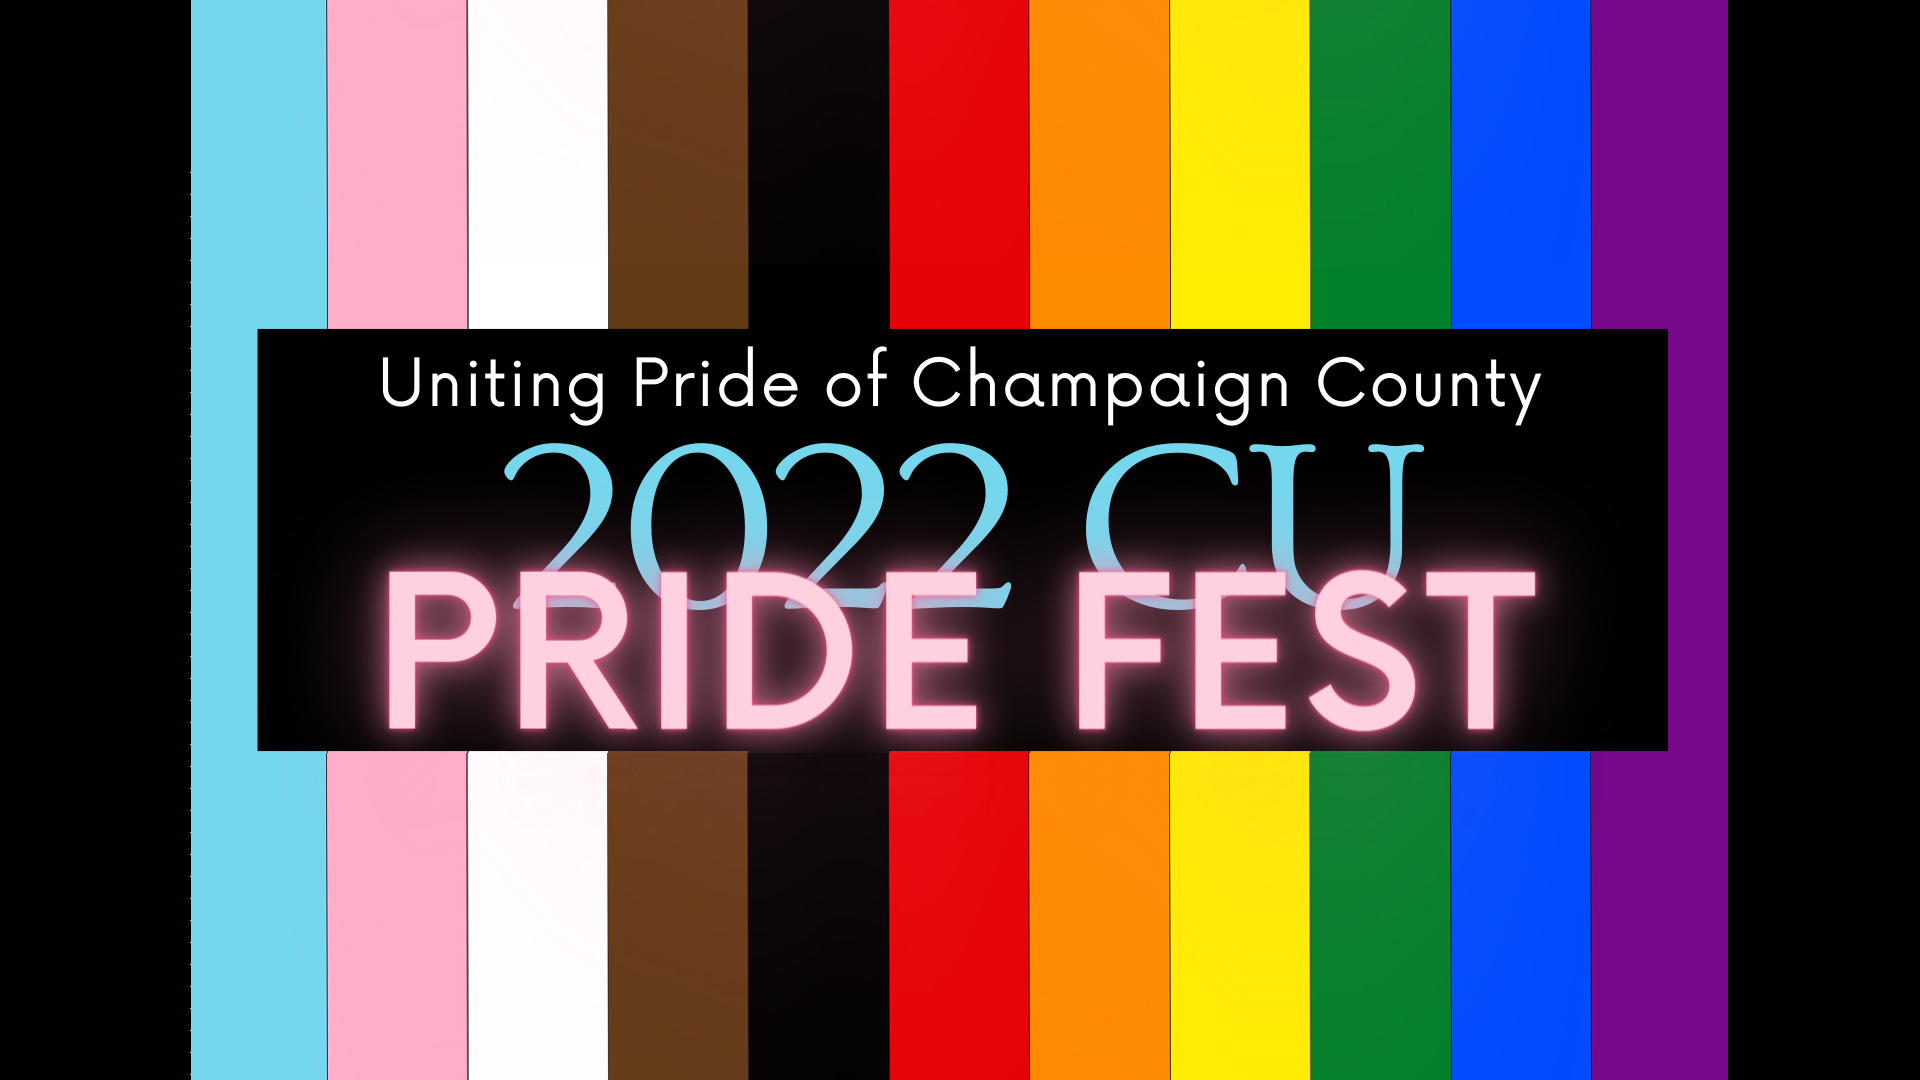 Uniting Pride of Champaign County 2022 CU Pride Fest over new 11-color band pride flag